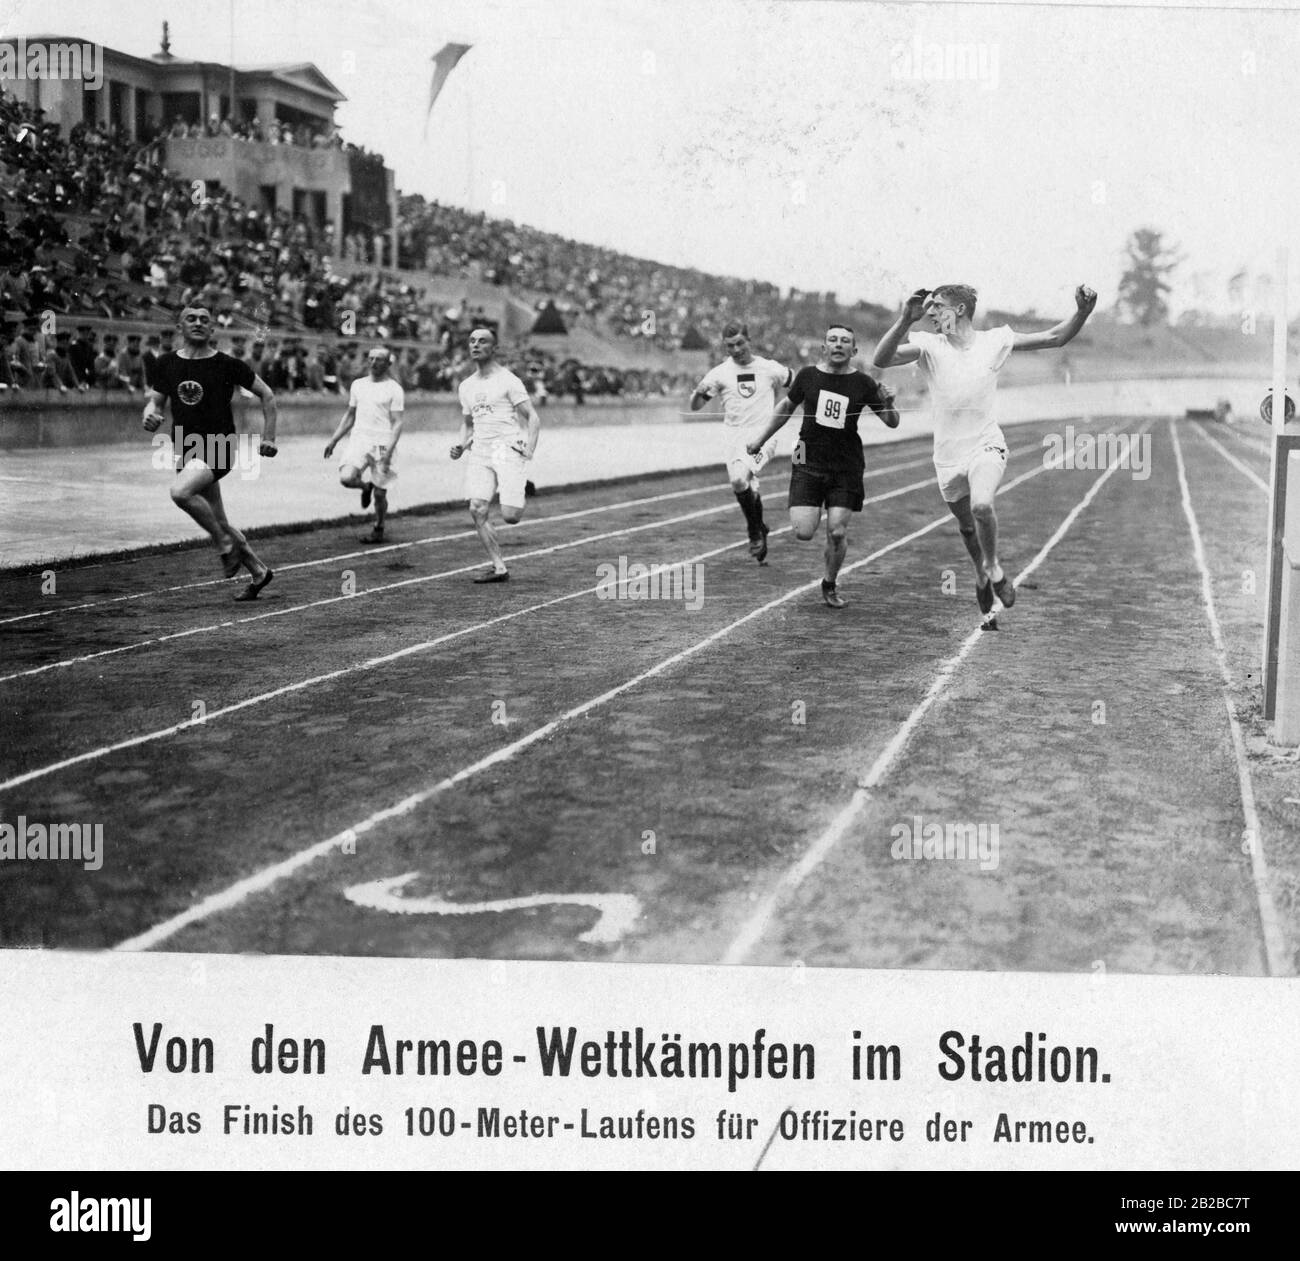 Officers of the German Imperial Army during the 100-meter run just before the finish. Stock Photo